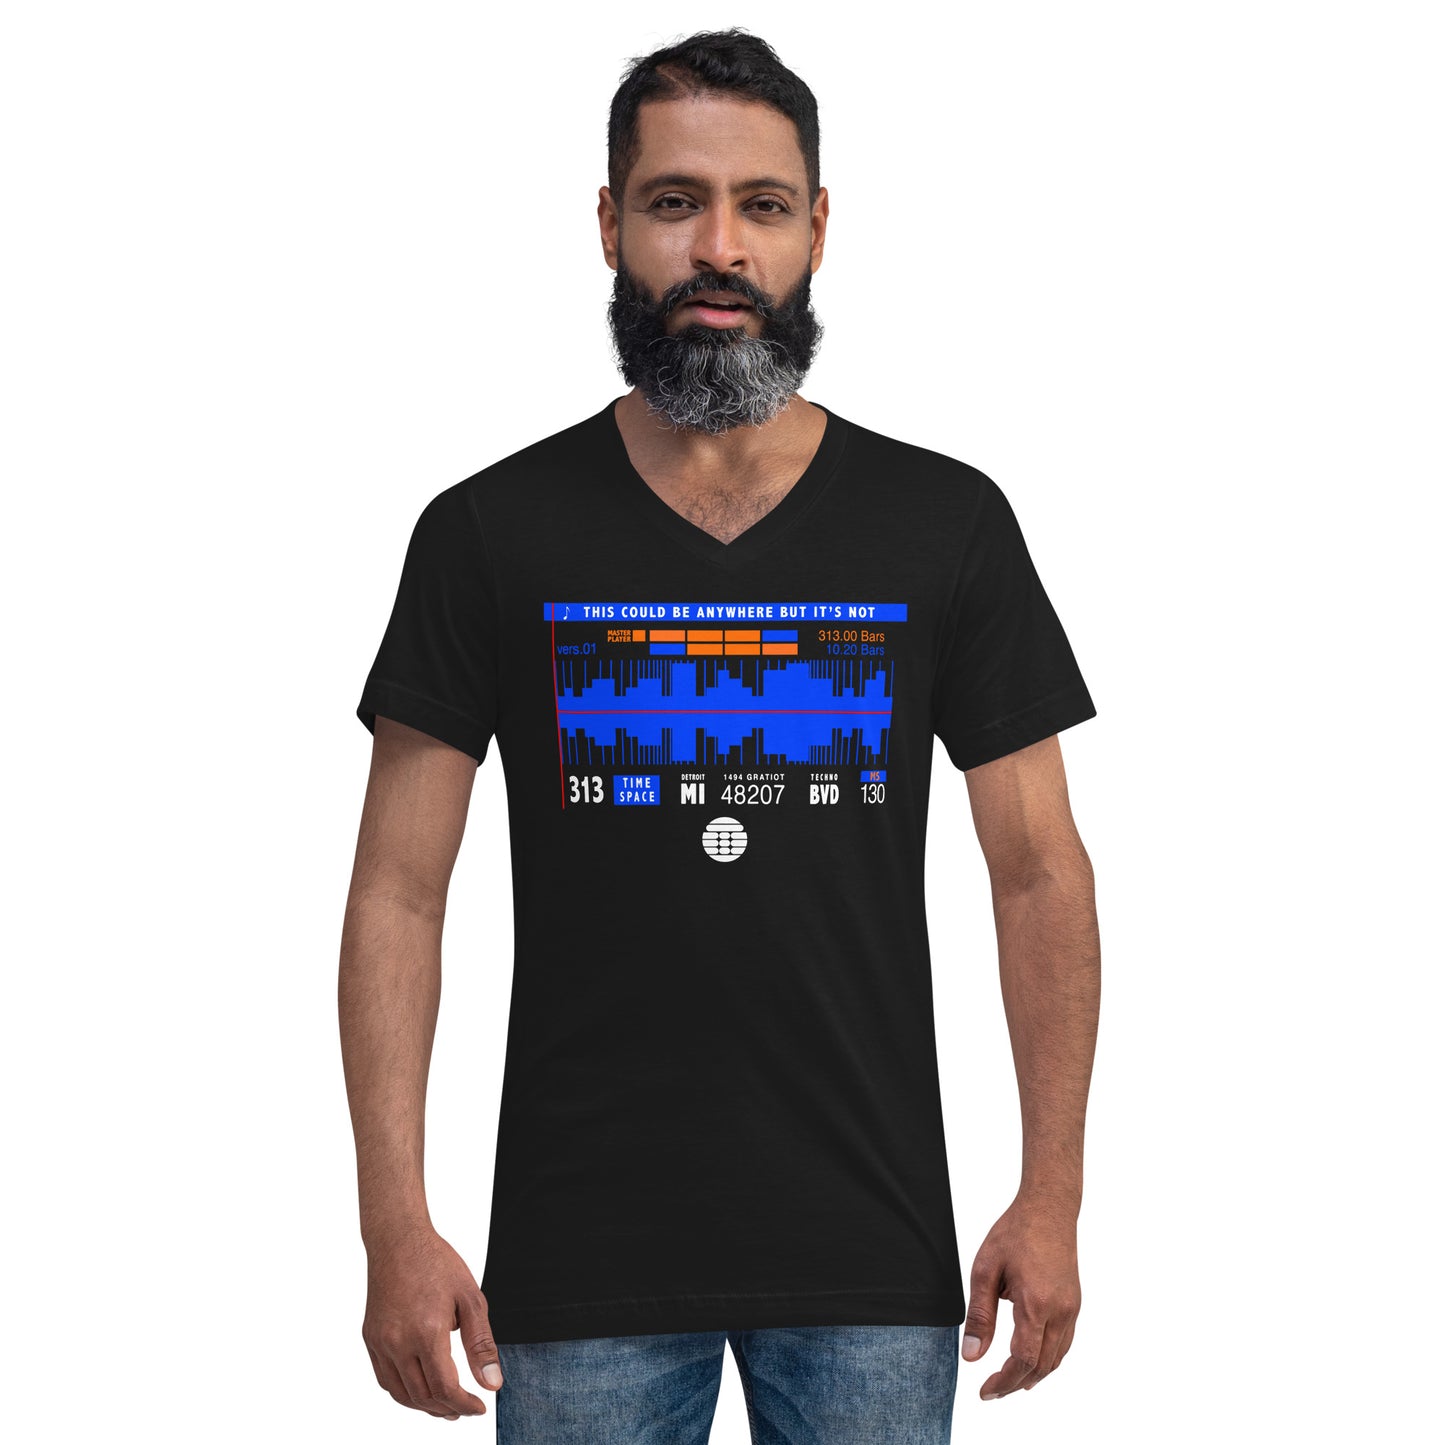 DERRICK MAY / This Could be Anywhere But It's Not Unisex Short Sleeve V-Neck T-Shirt